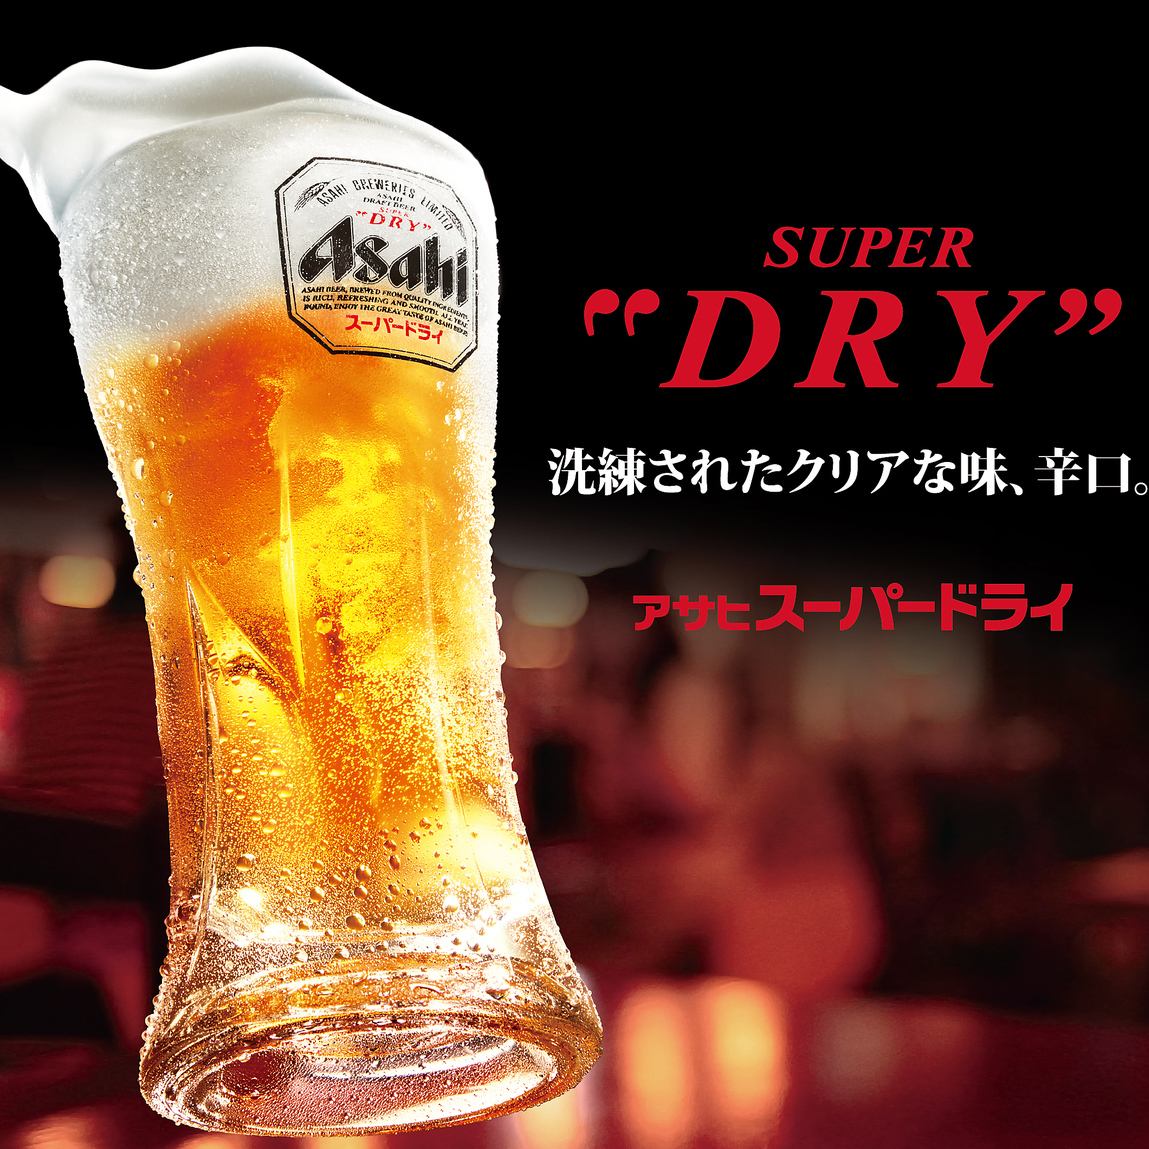 All-you-can-drink is 2200 yen! You can enjoy plenty of deals!